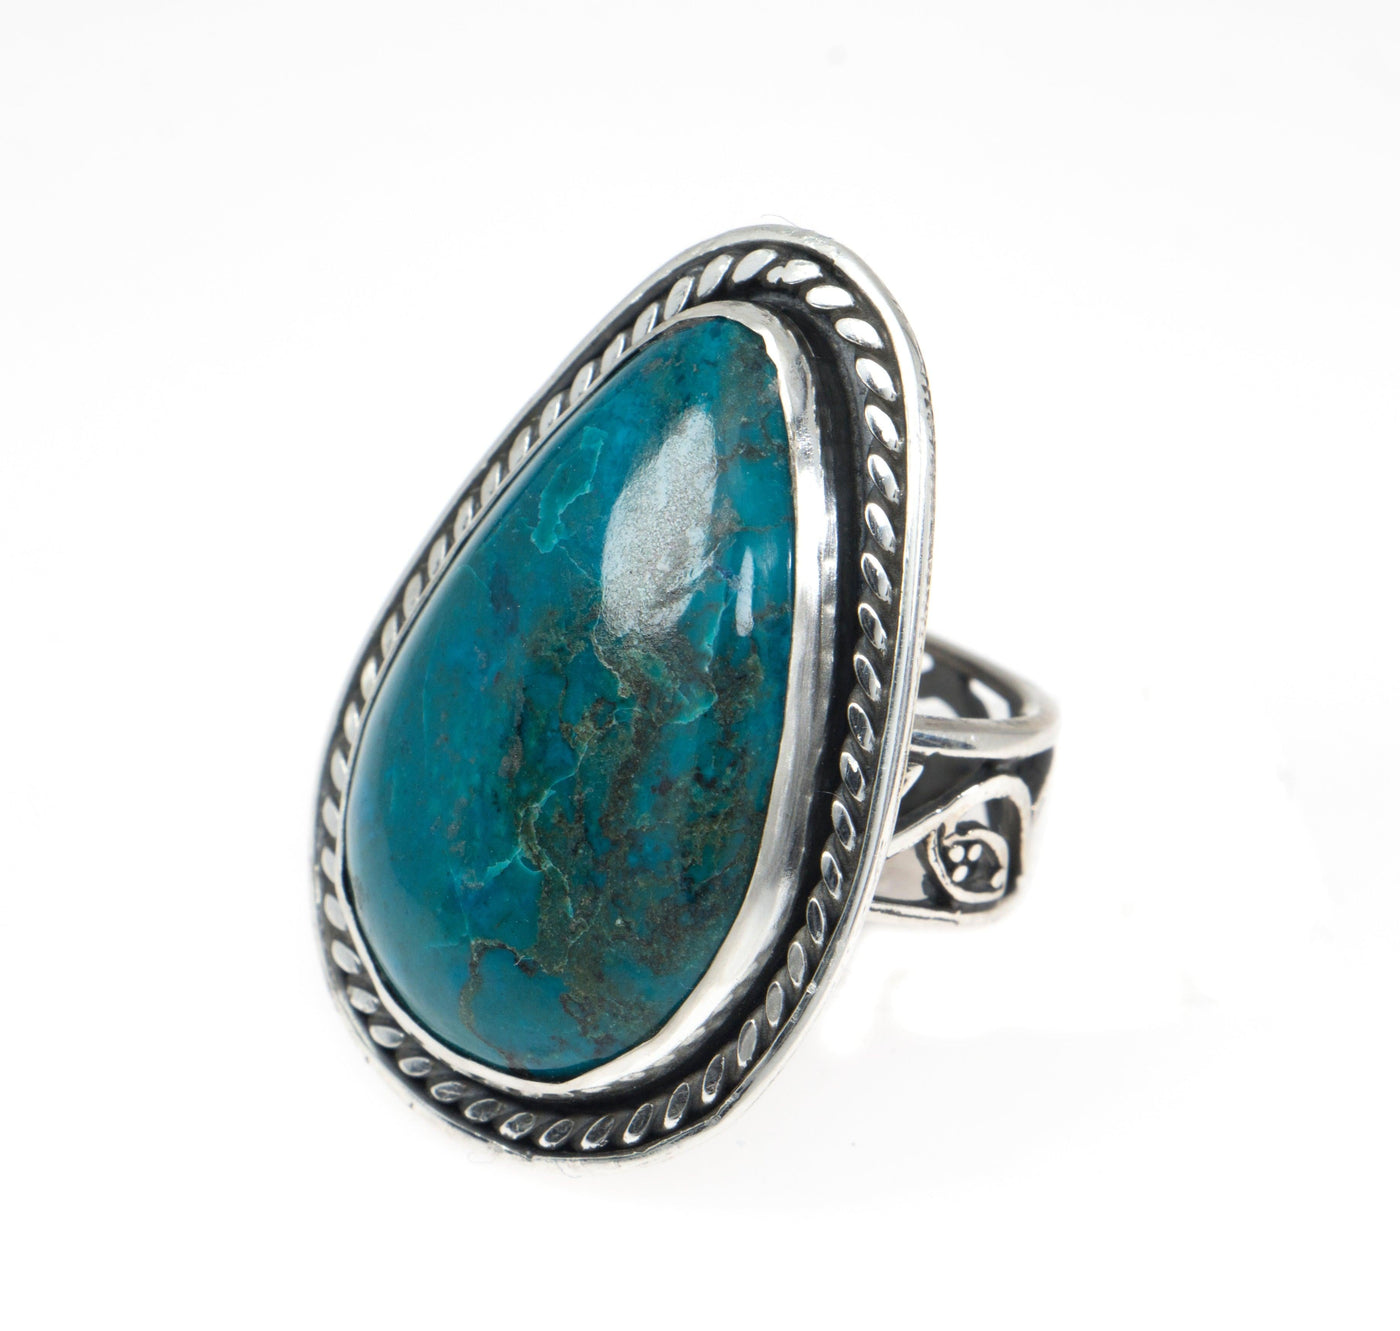 Eilat Stone Ring in 925 Sterling Silver #1 - Spring Nahal